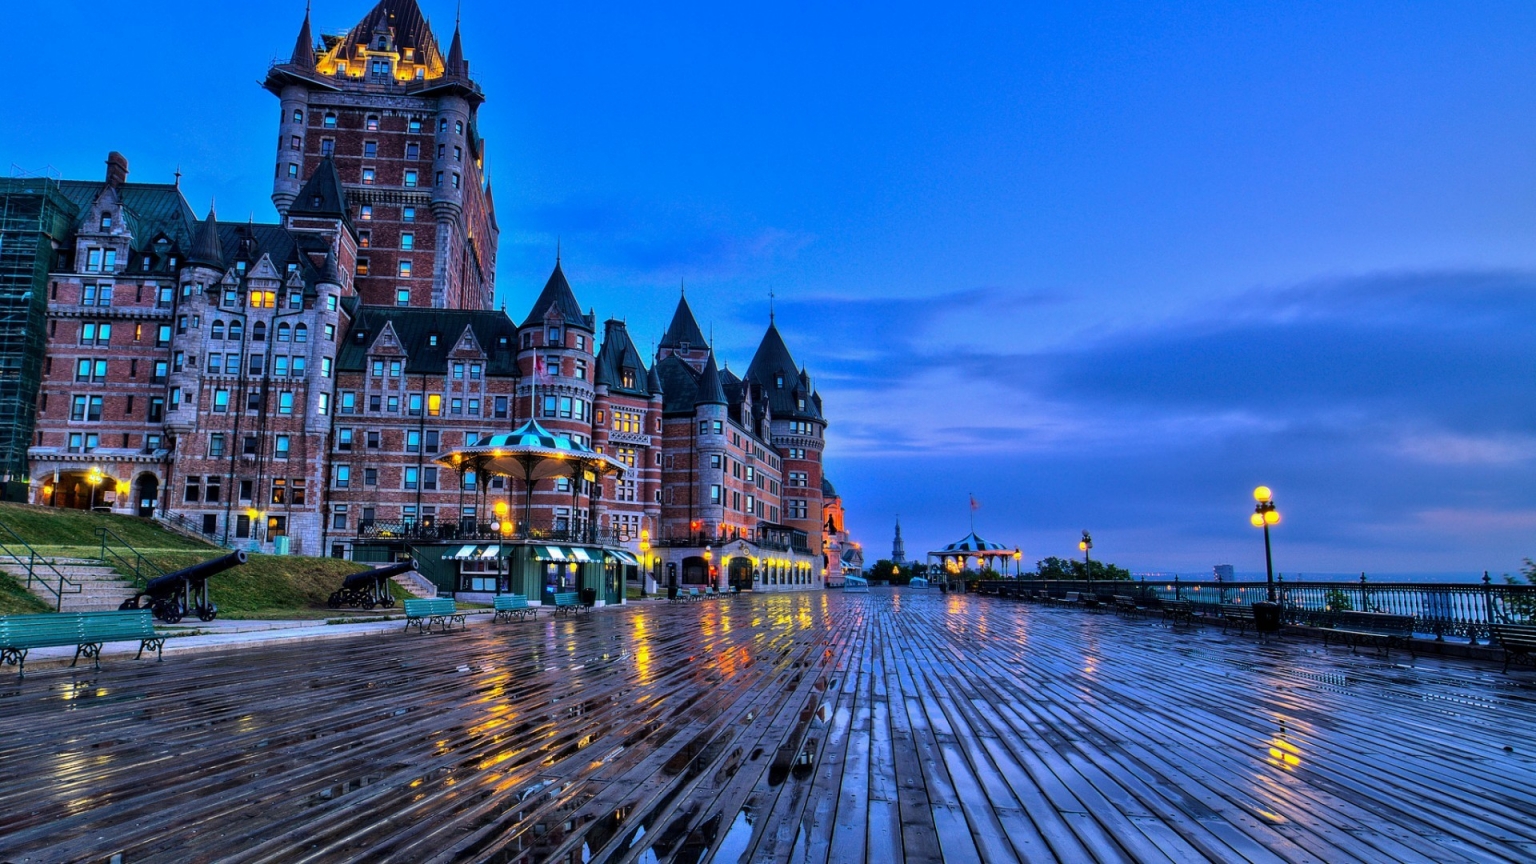 Chateau Frontenac Quebec for 1536 x 864 HDTV resolution